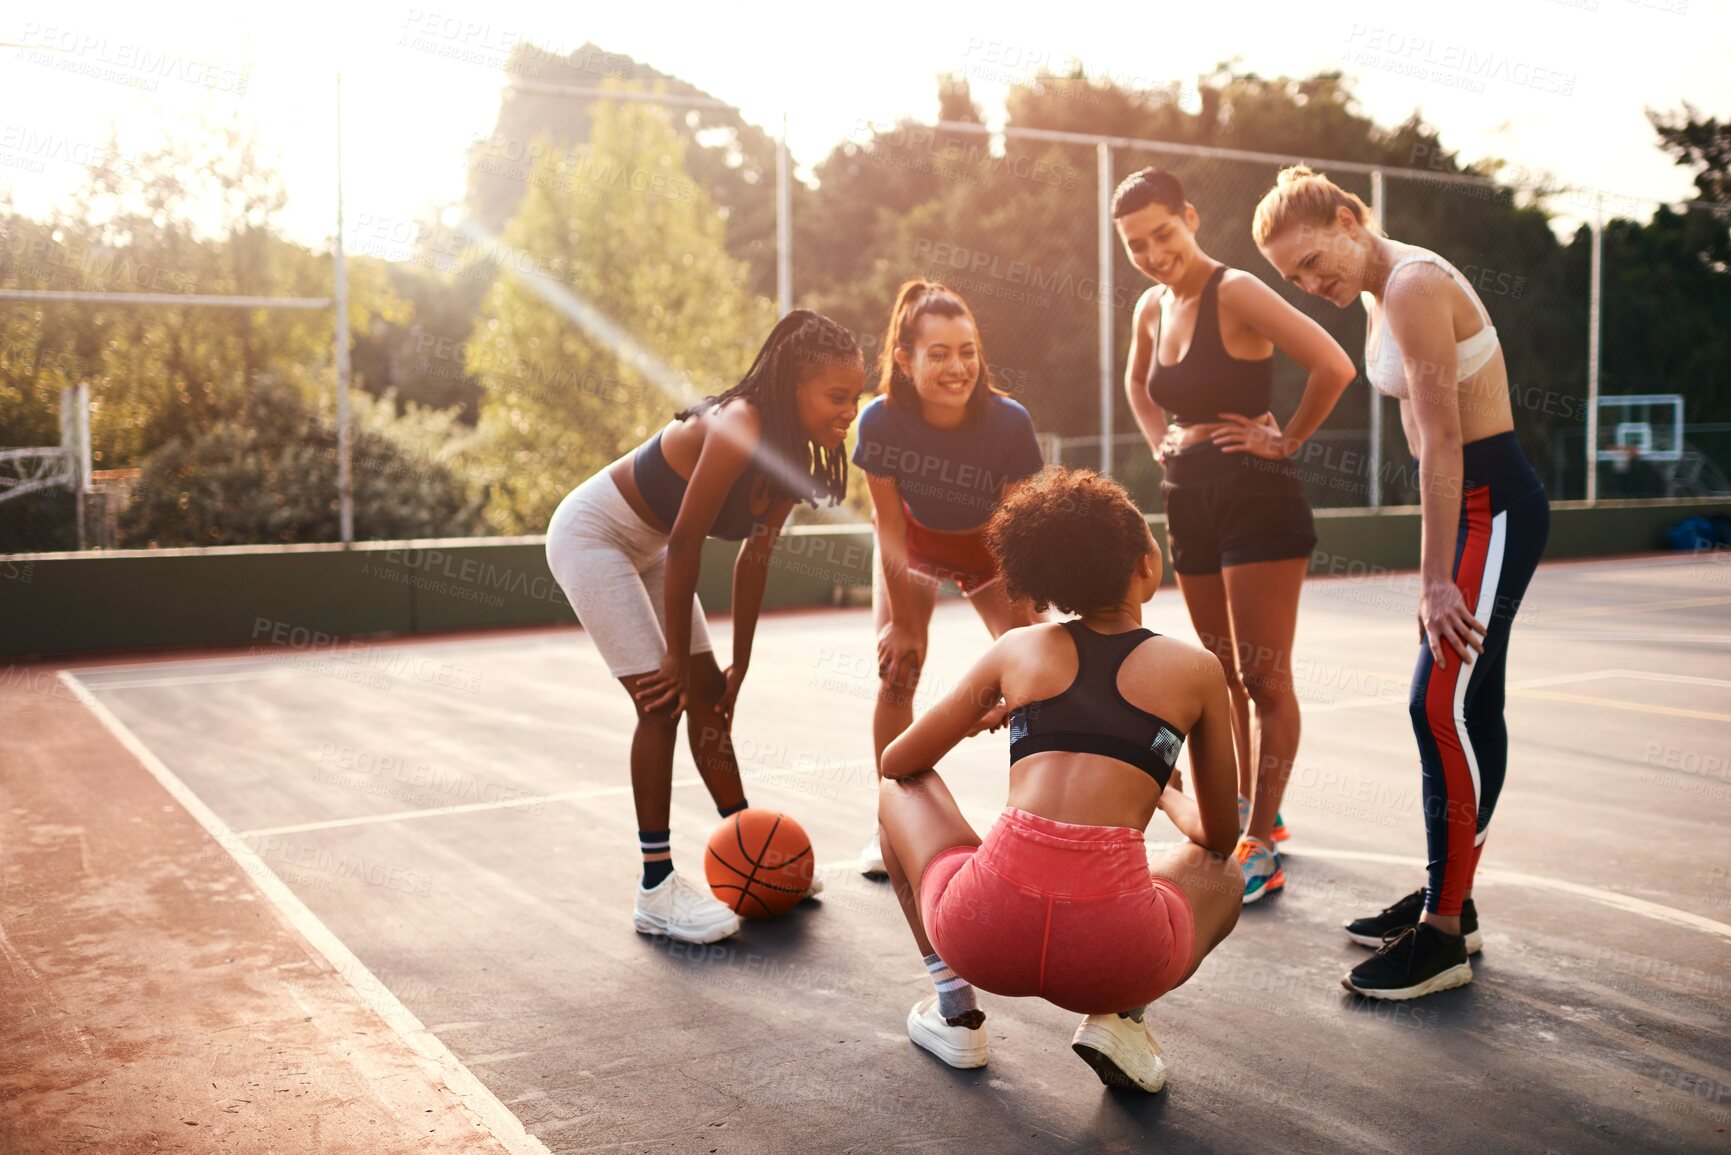 Buy stock photo Cropped shot of a diverse group of friends getting ready to play a game of basketball together during the day